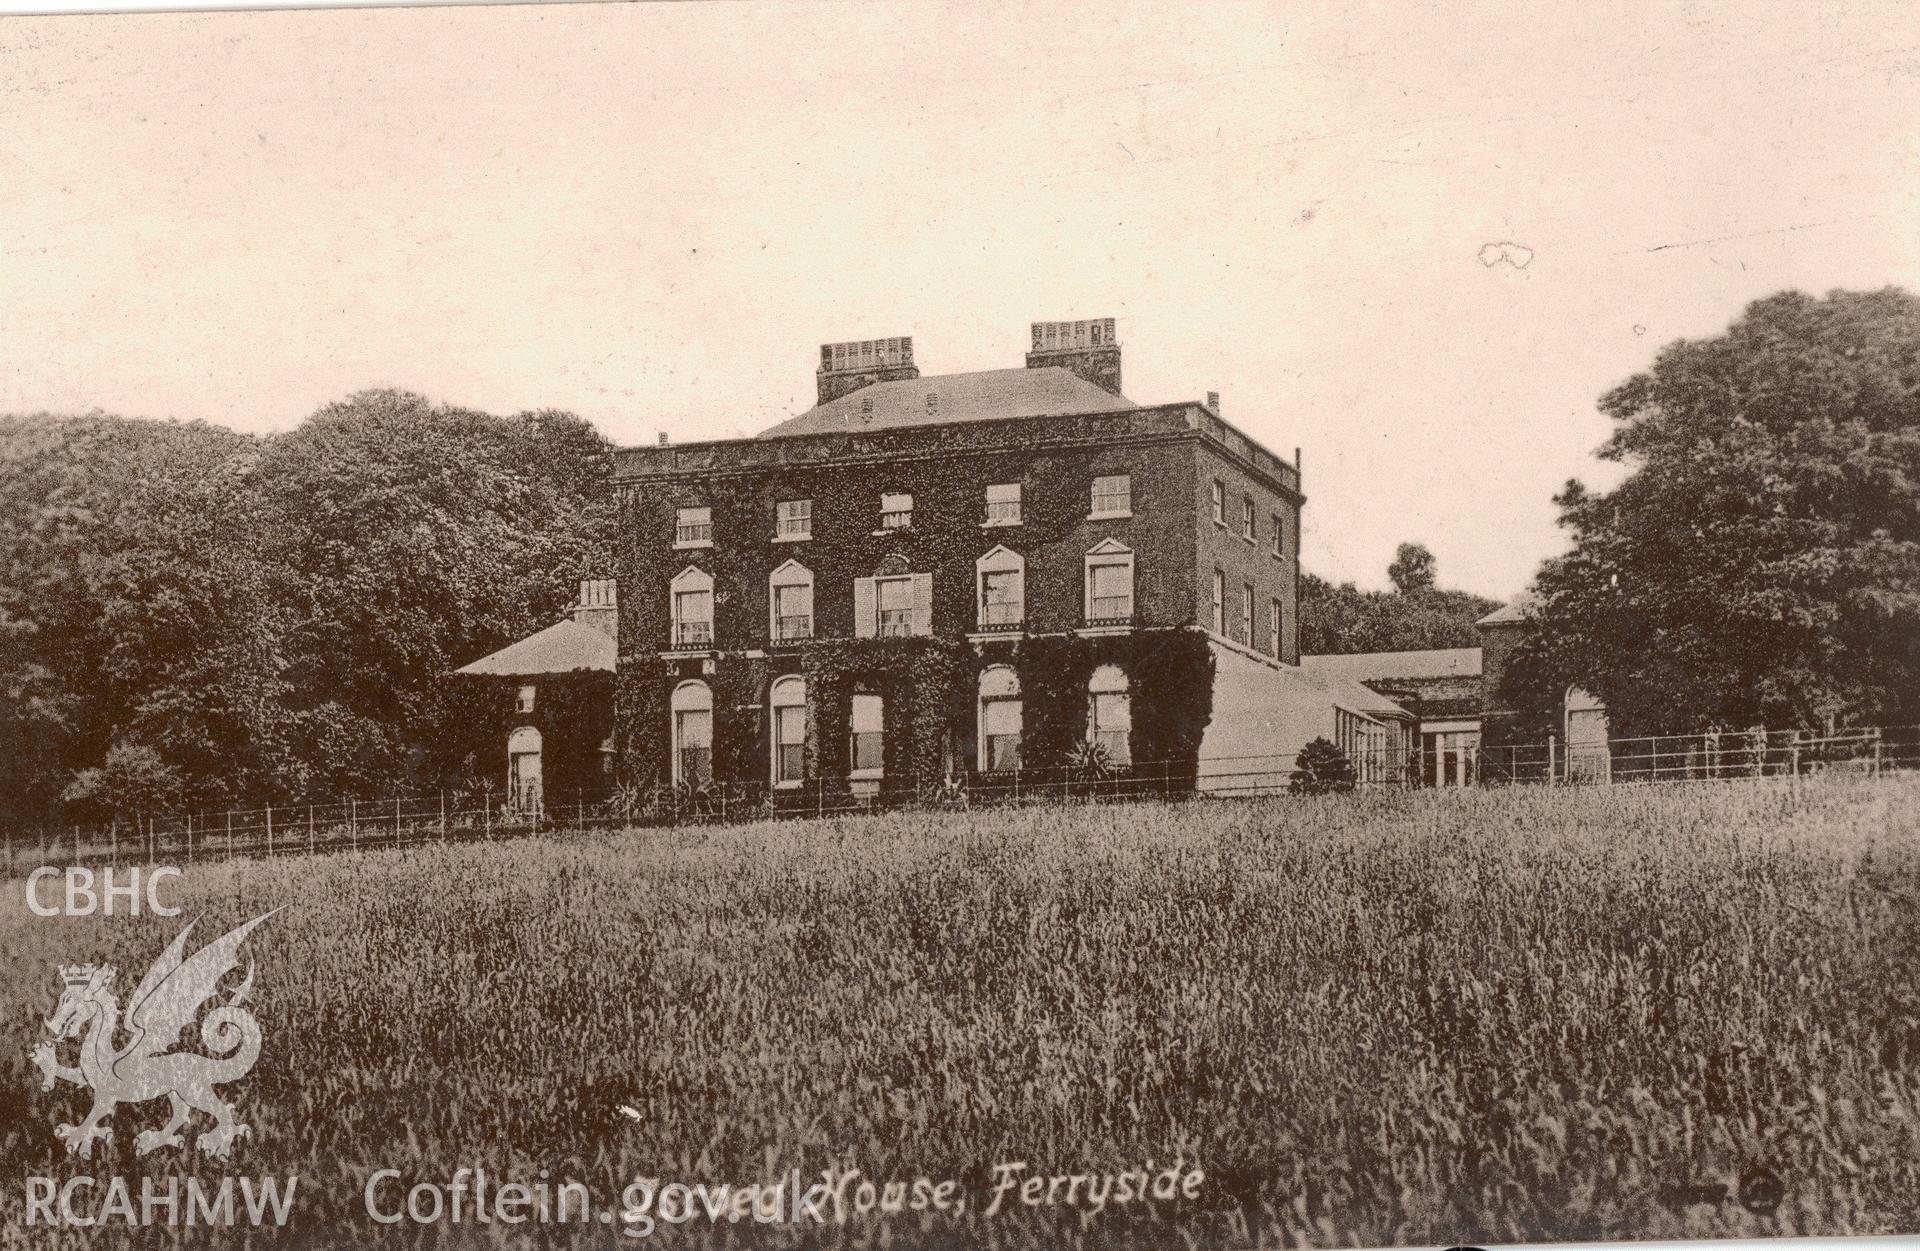 Digitised postcard image of Iscoed House, Ferryside, E Davies, Dorothy Caf?, Ferryside. Produced by Parks and Gardens Data Services, from an original item in the Peter Davis Collection at Parks and Gardens UK. We hold only web-resolution images of this collection, suitable for viewing on screen and for research purposes only. We do not hold the original images, or publication quality scans.